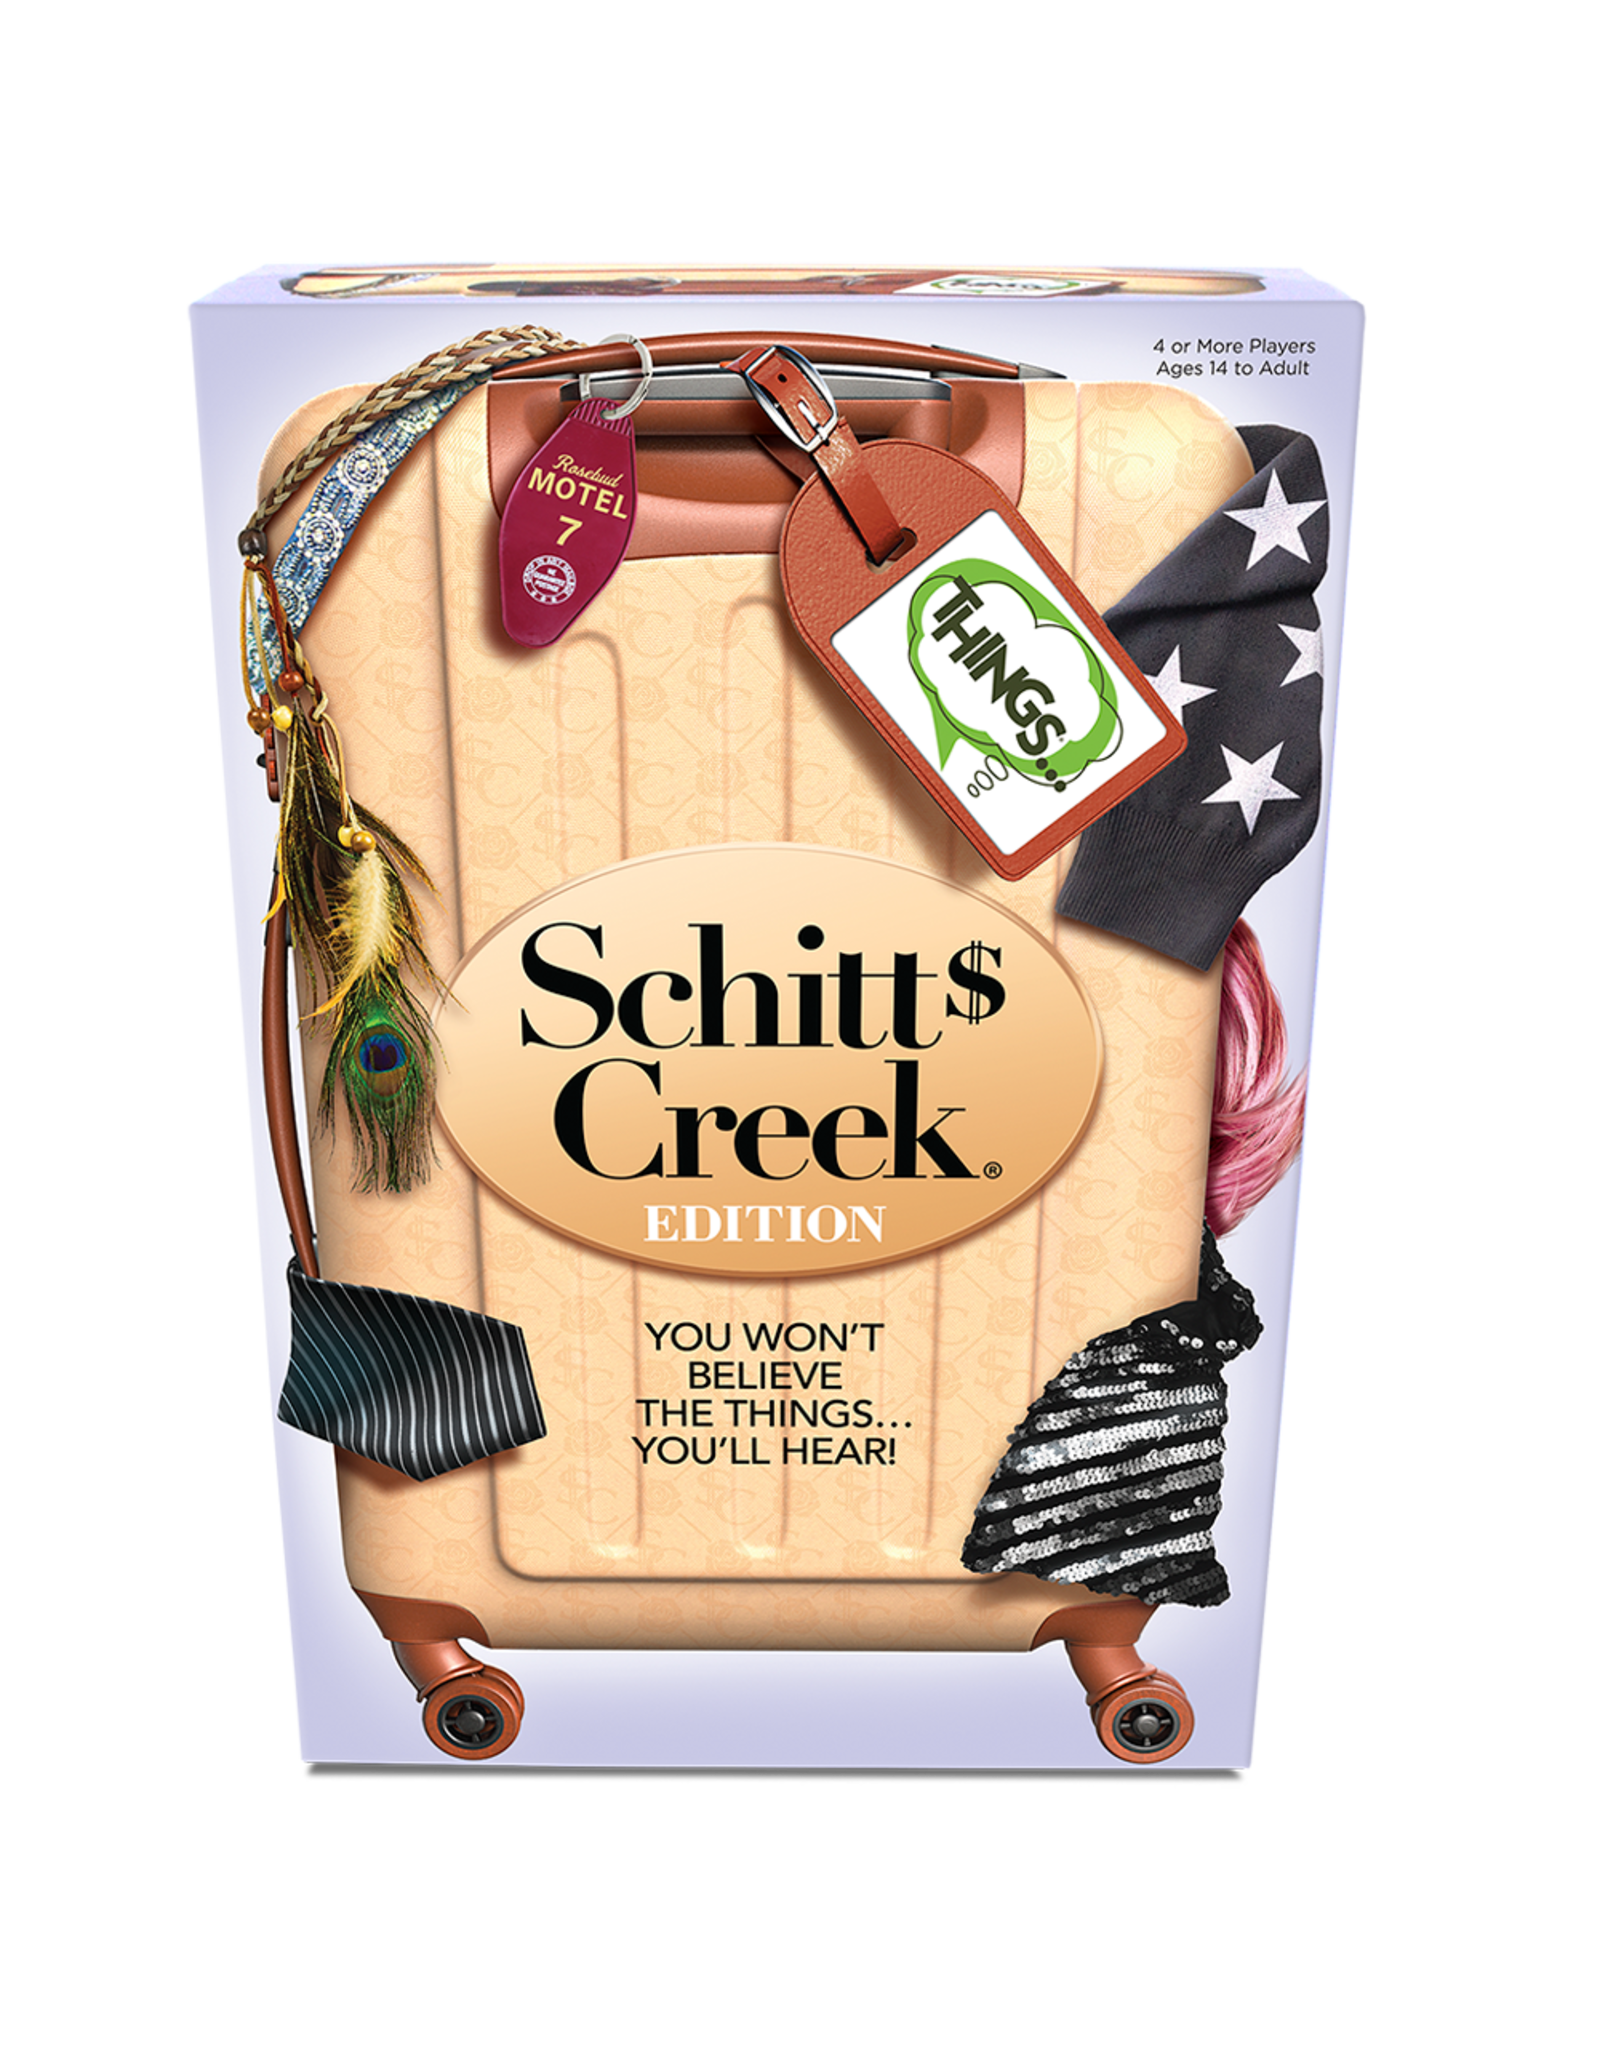 Play Monster Game of Things: Schitt's Creek Edition